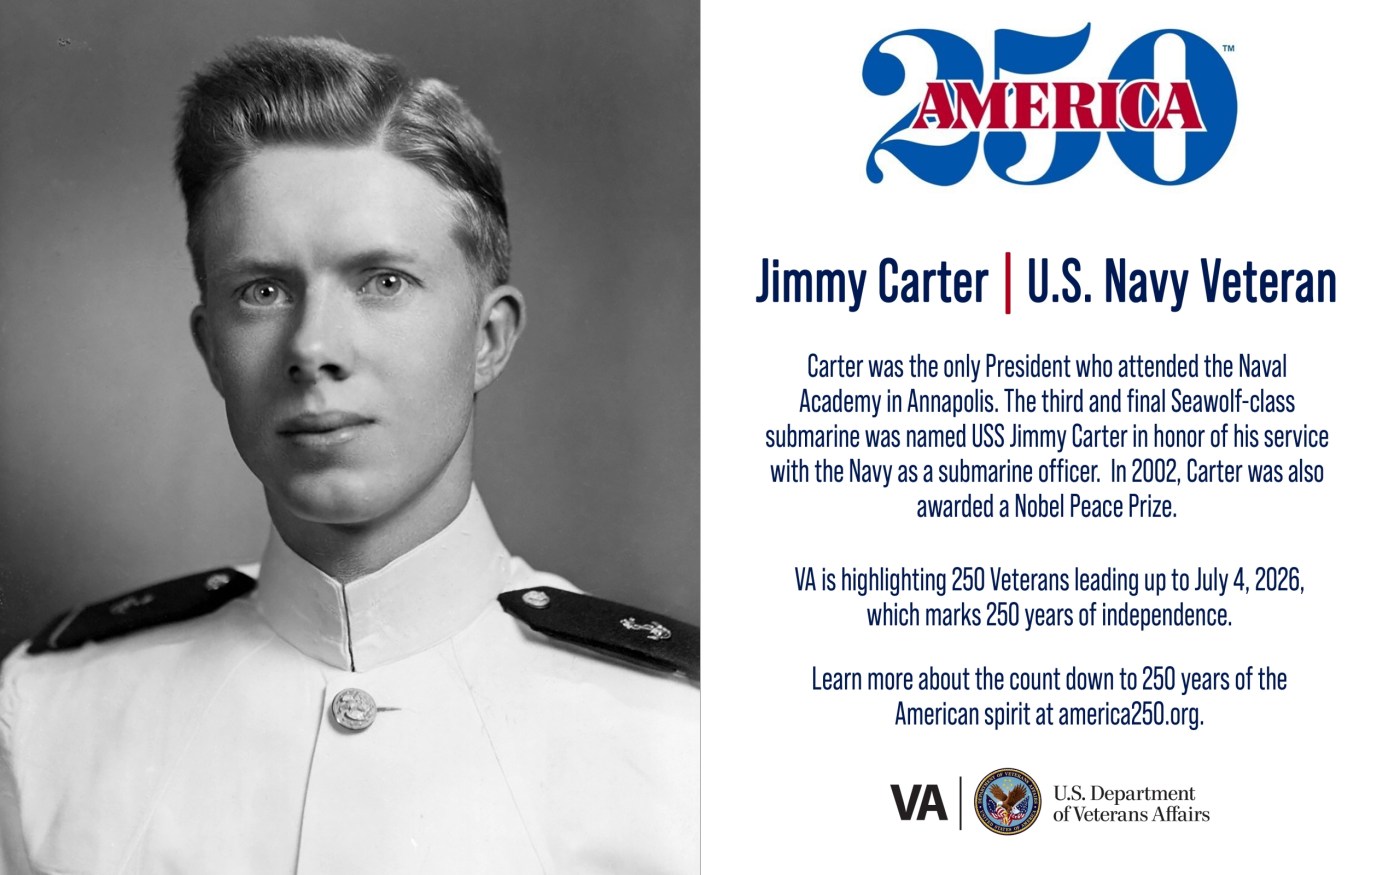 This week’s America250 salute is Navy Veteran Jimmy Carter, who served as a naval radar officer before becoming the 39th president of the U.S.